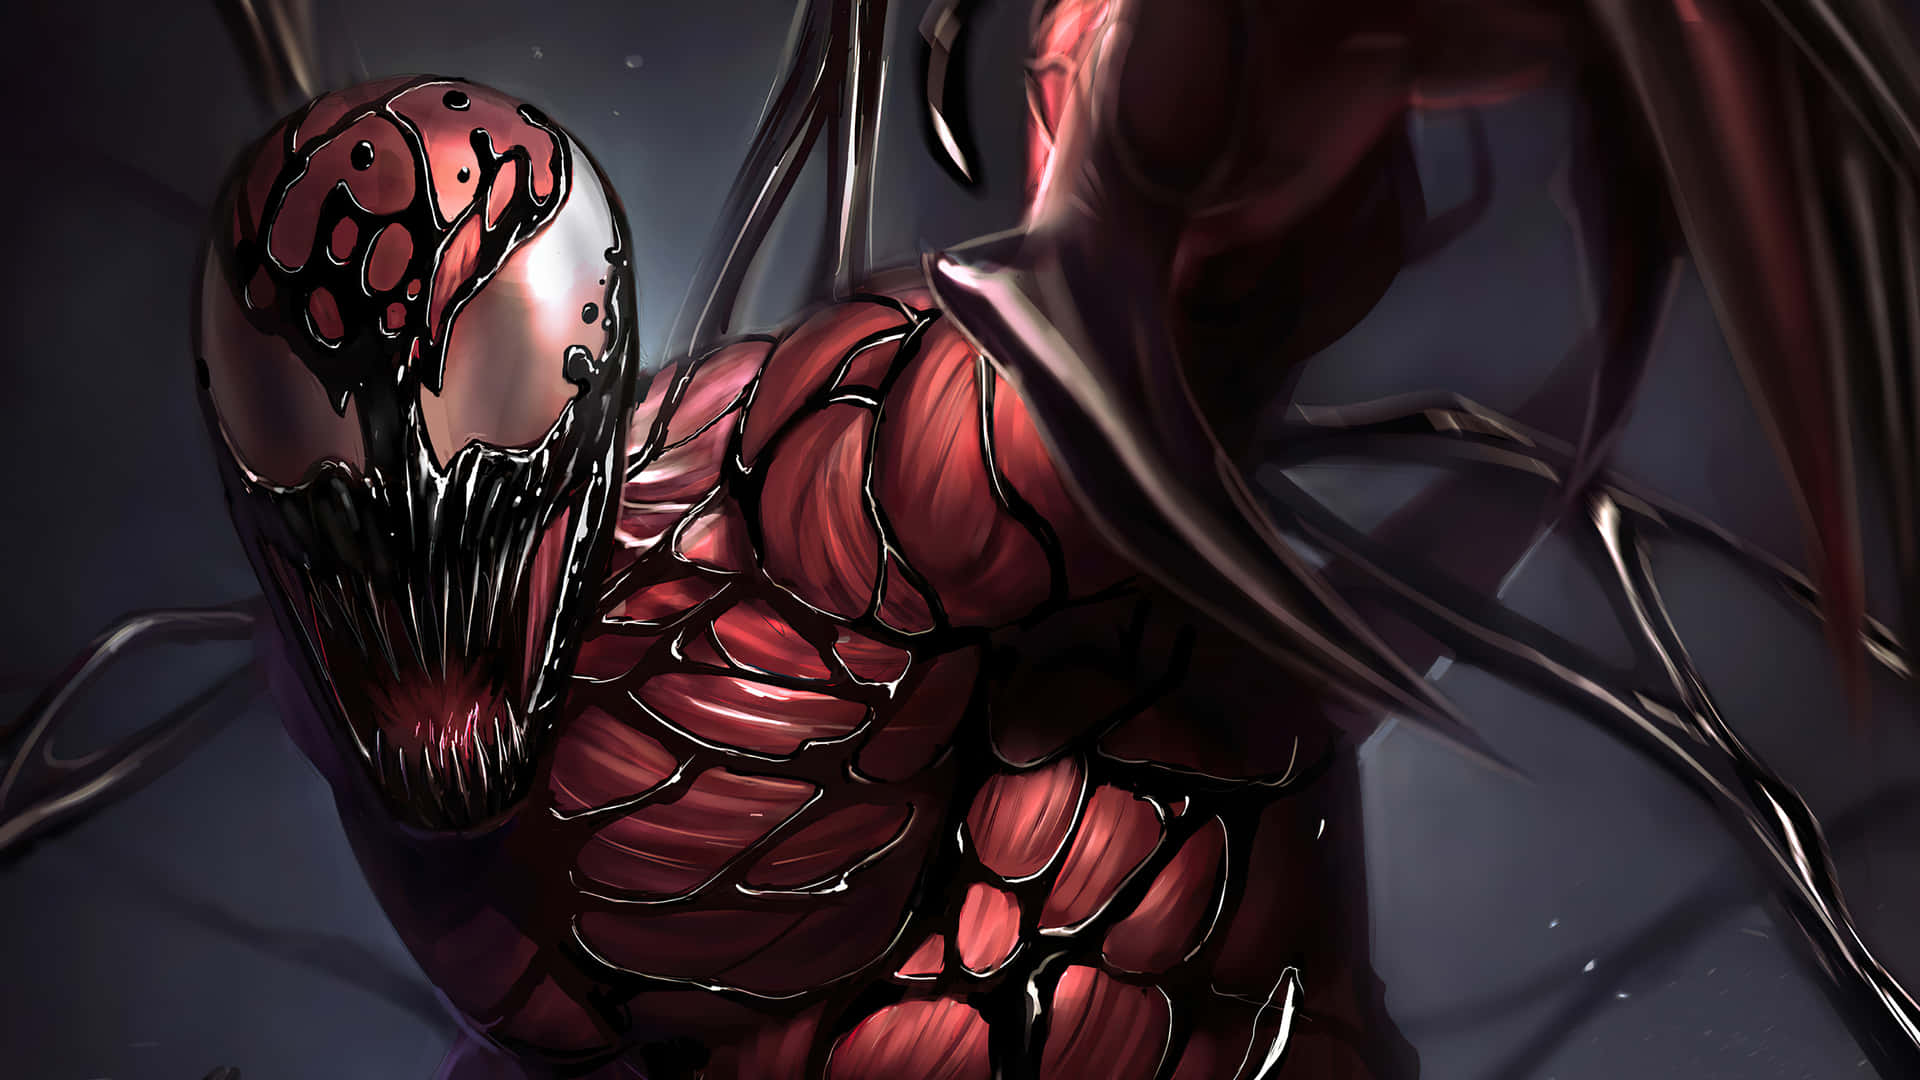 Symbiote Unleashed: Fearsome Creature Emerges From the Darkness Wallpaper